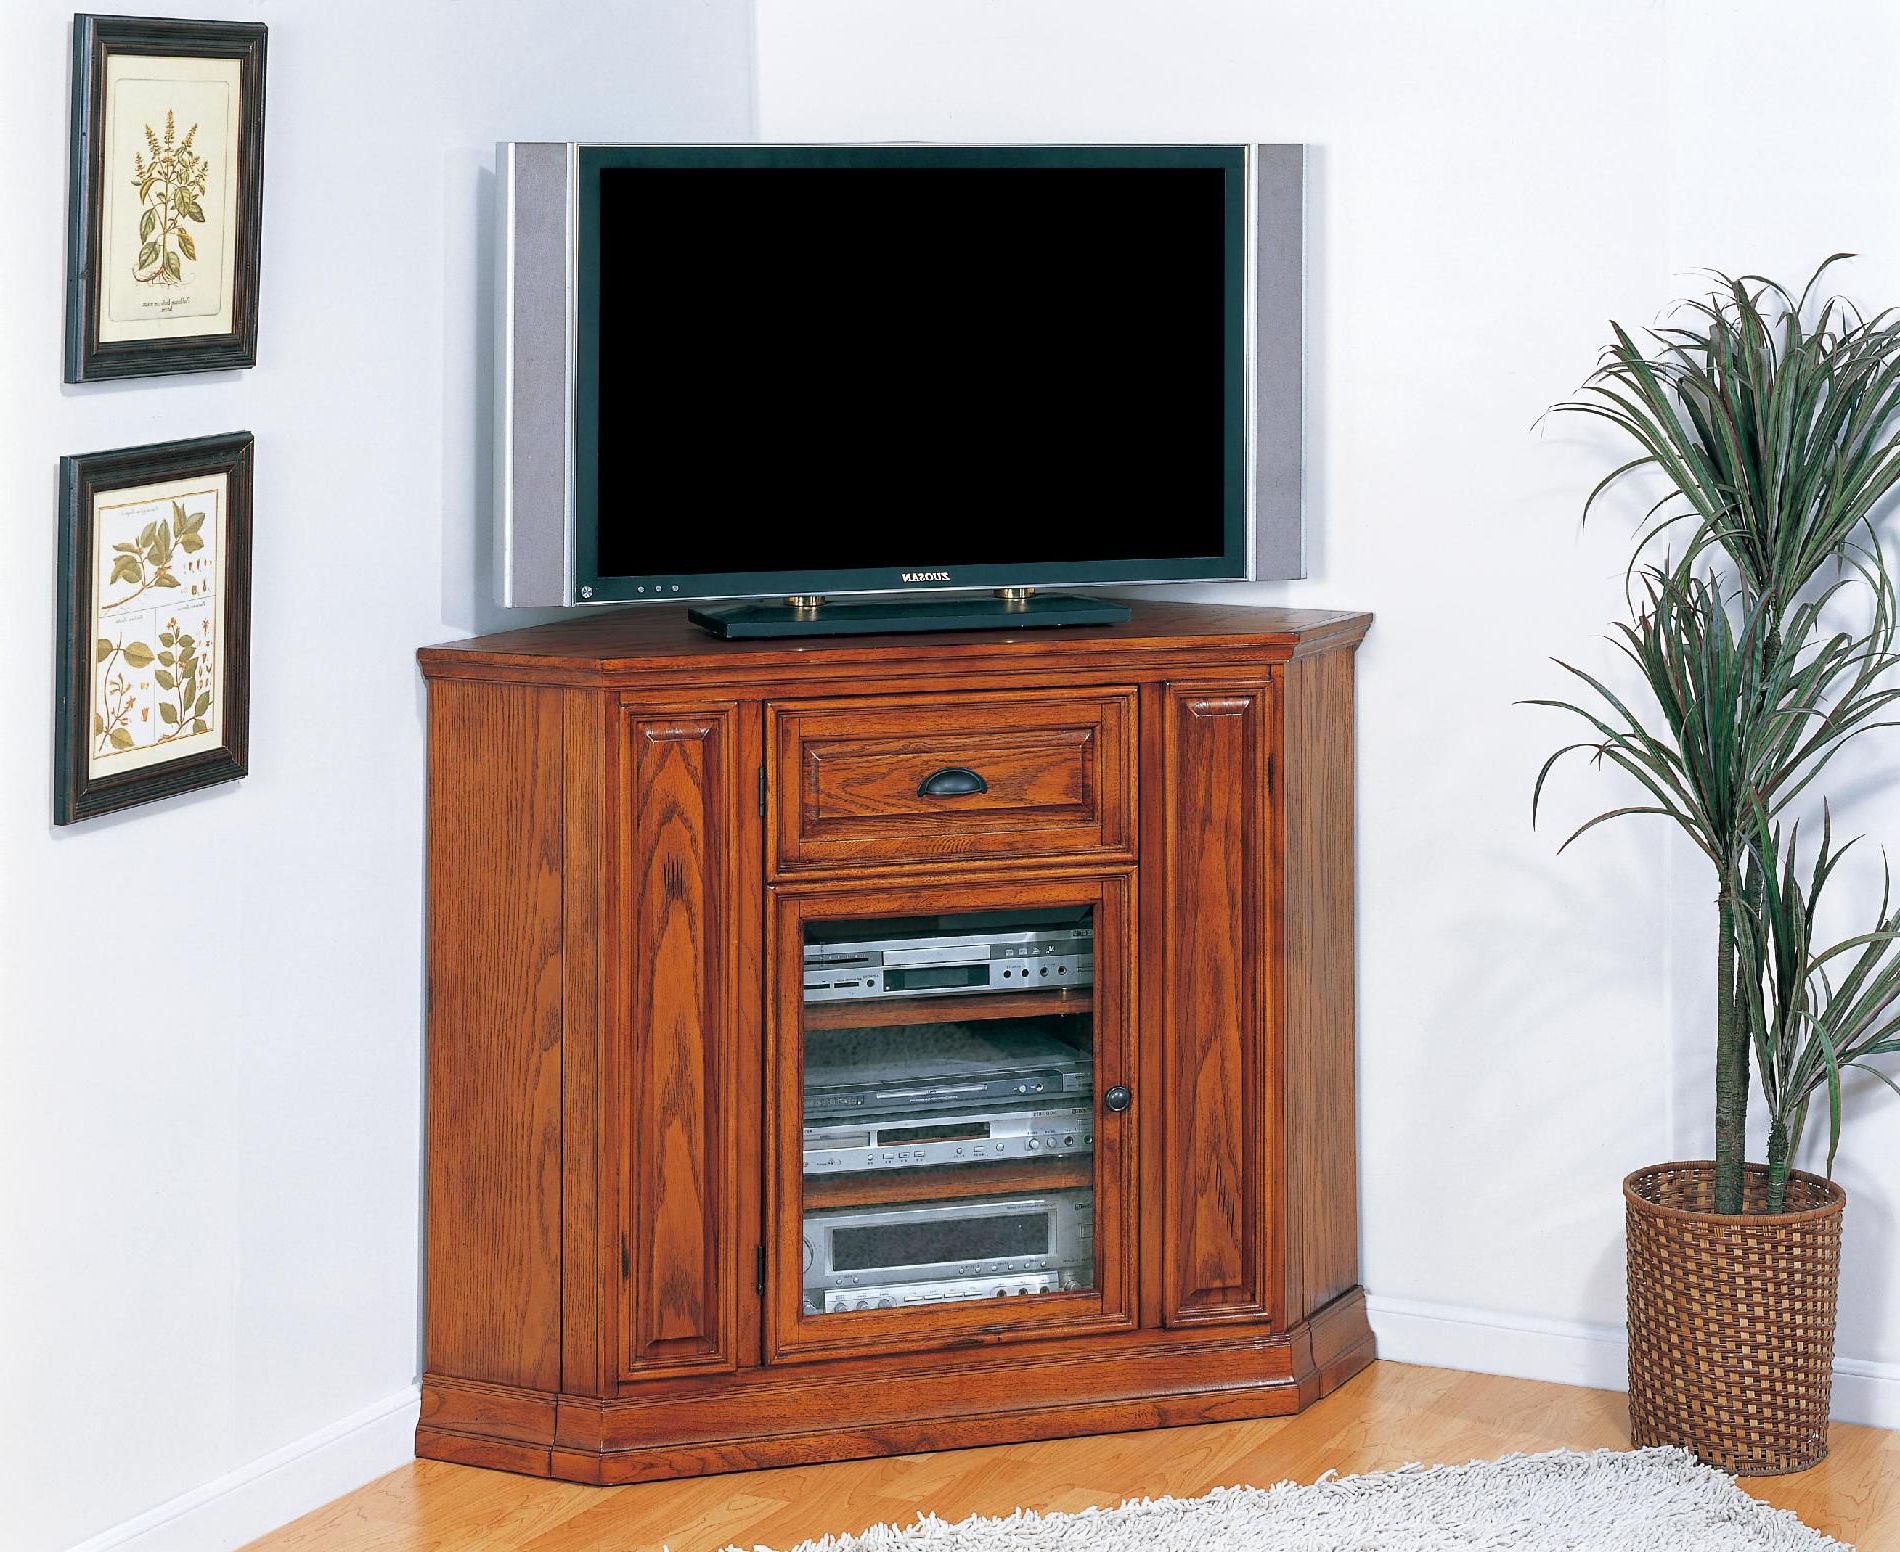 2017 Corner Tv Cabinets With Hutch With Regard To Corner Tv Console With Hutch – Corner Designs (View 7 of 20)